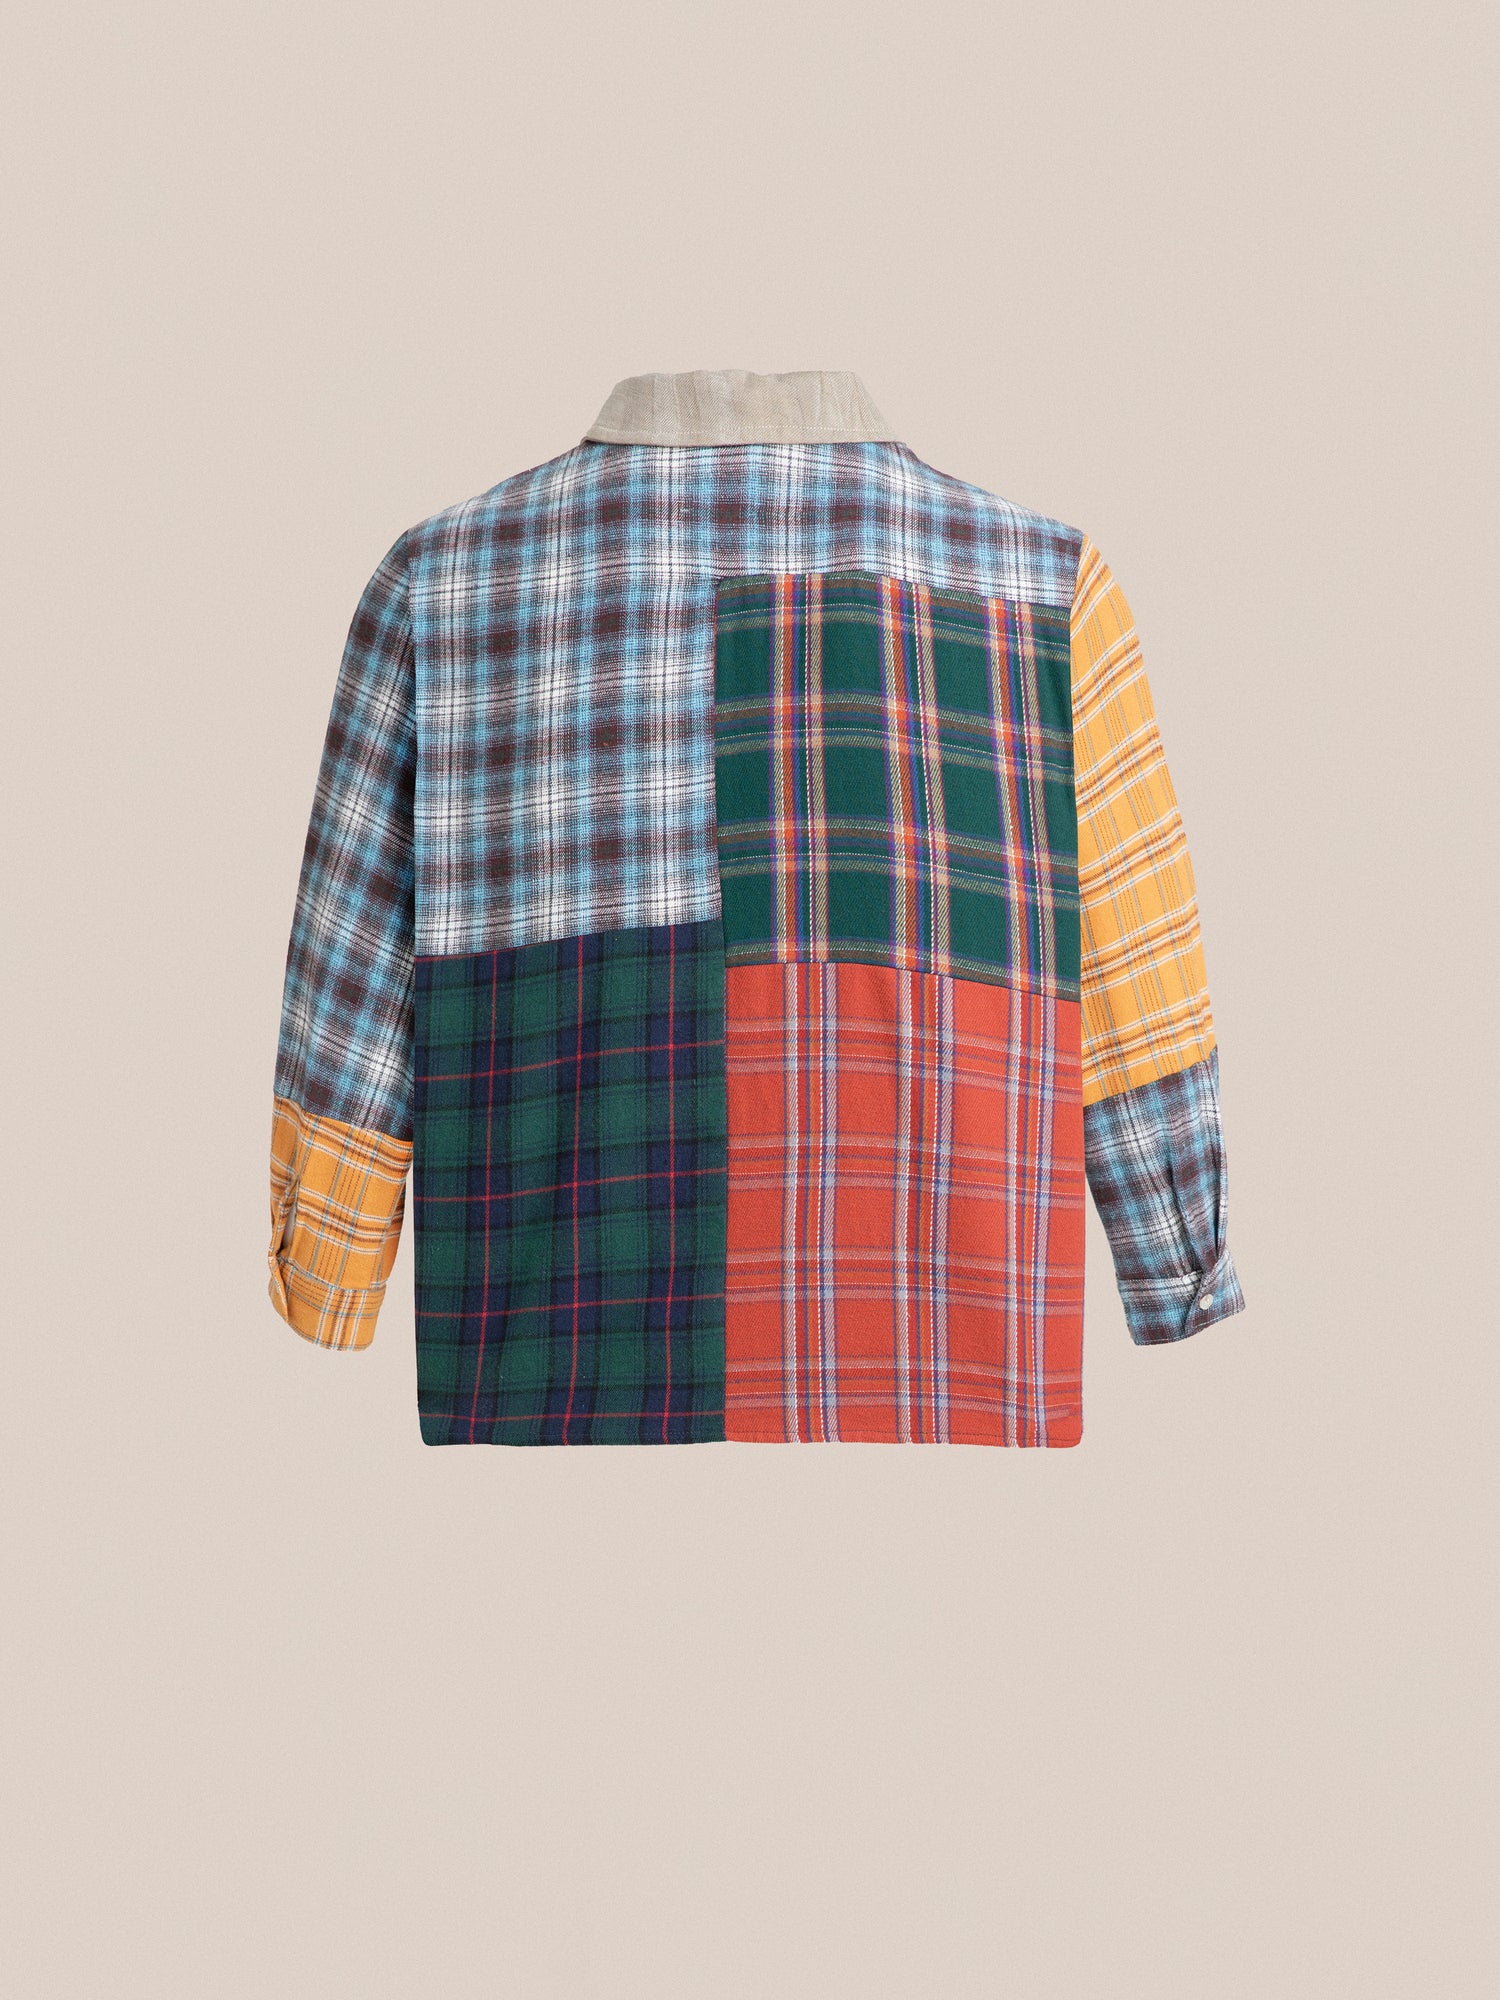 A zip-up Multi Plaid Tartan shirt with a patchwork pattern by Found.